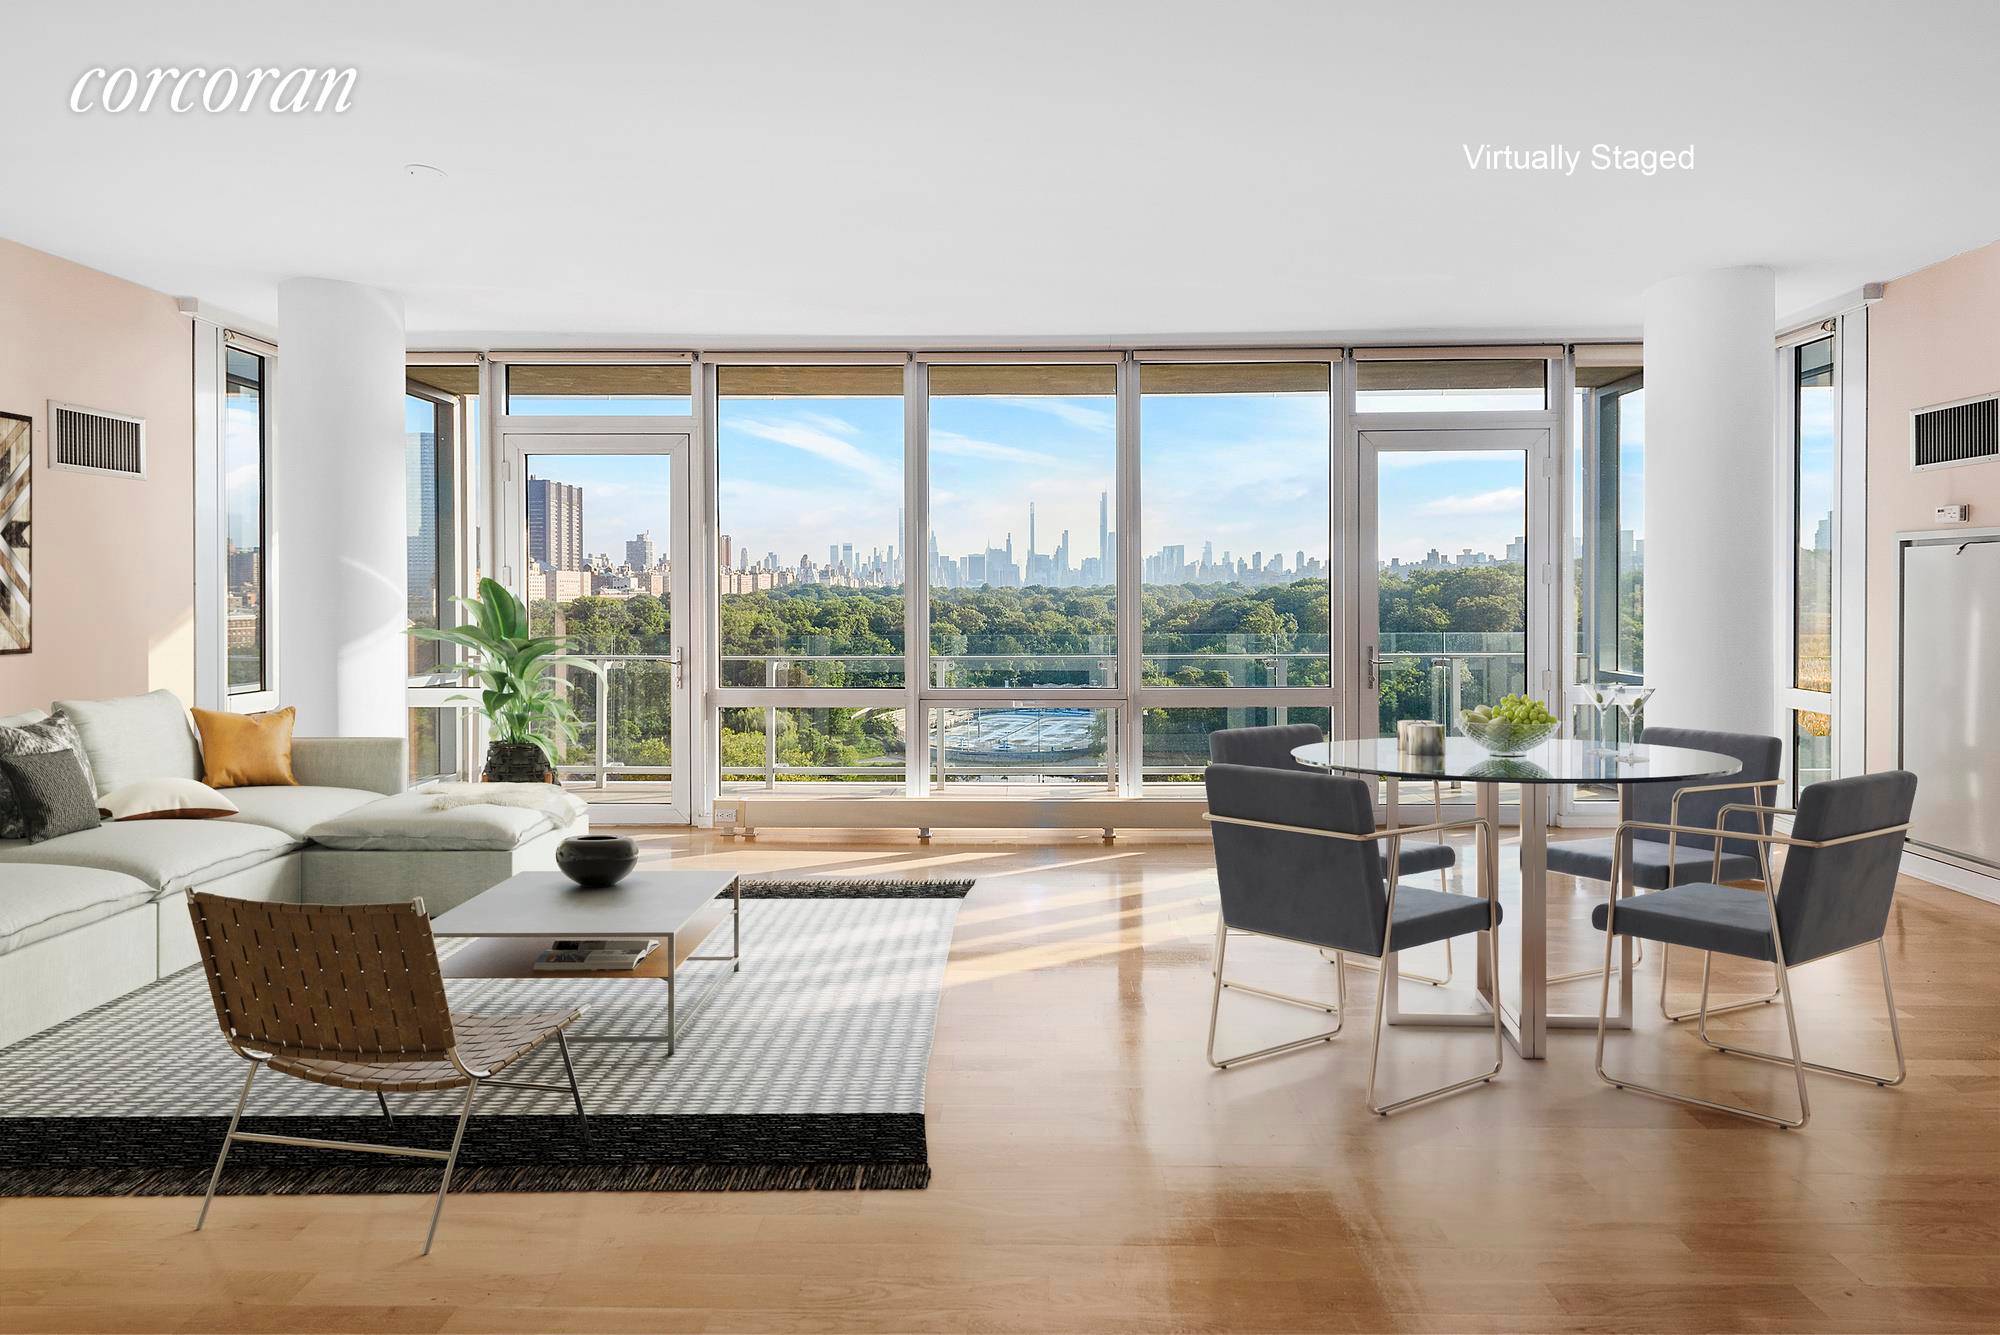 The best uninterrupted views of New York are from this 14 floor, 2 bedrooms 2.